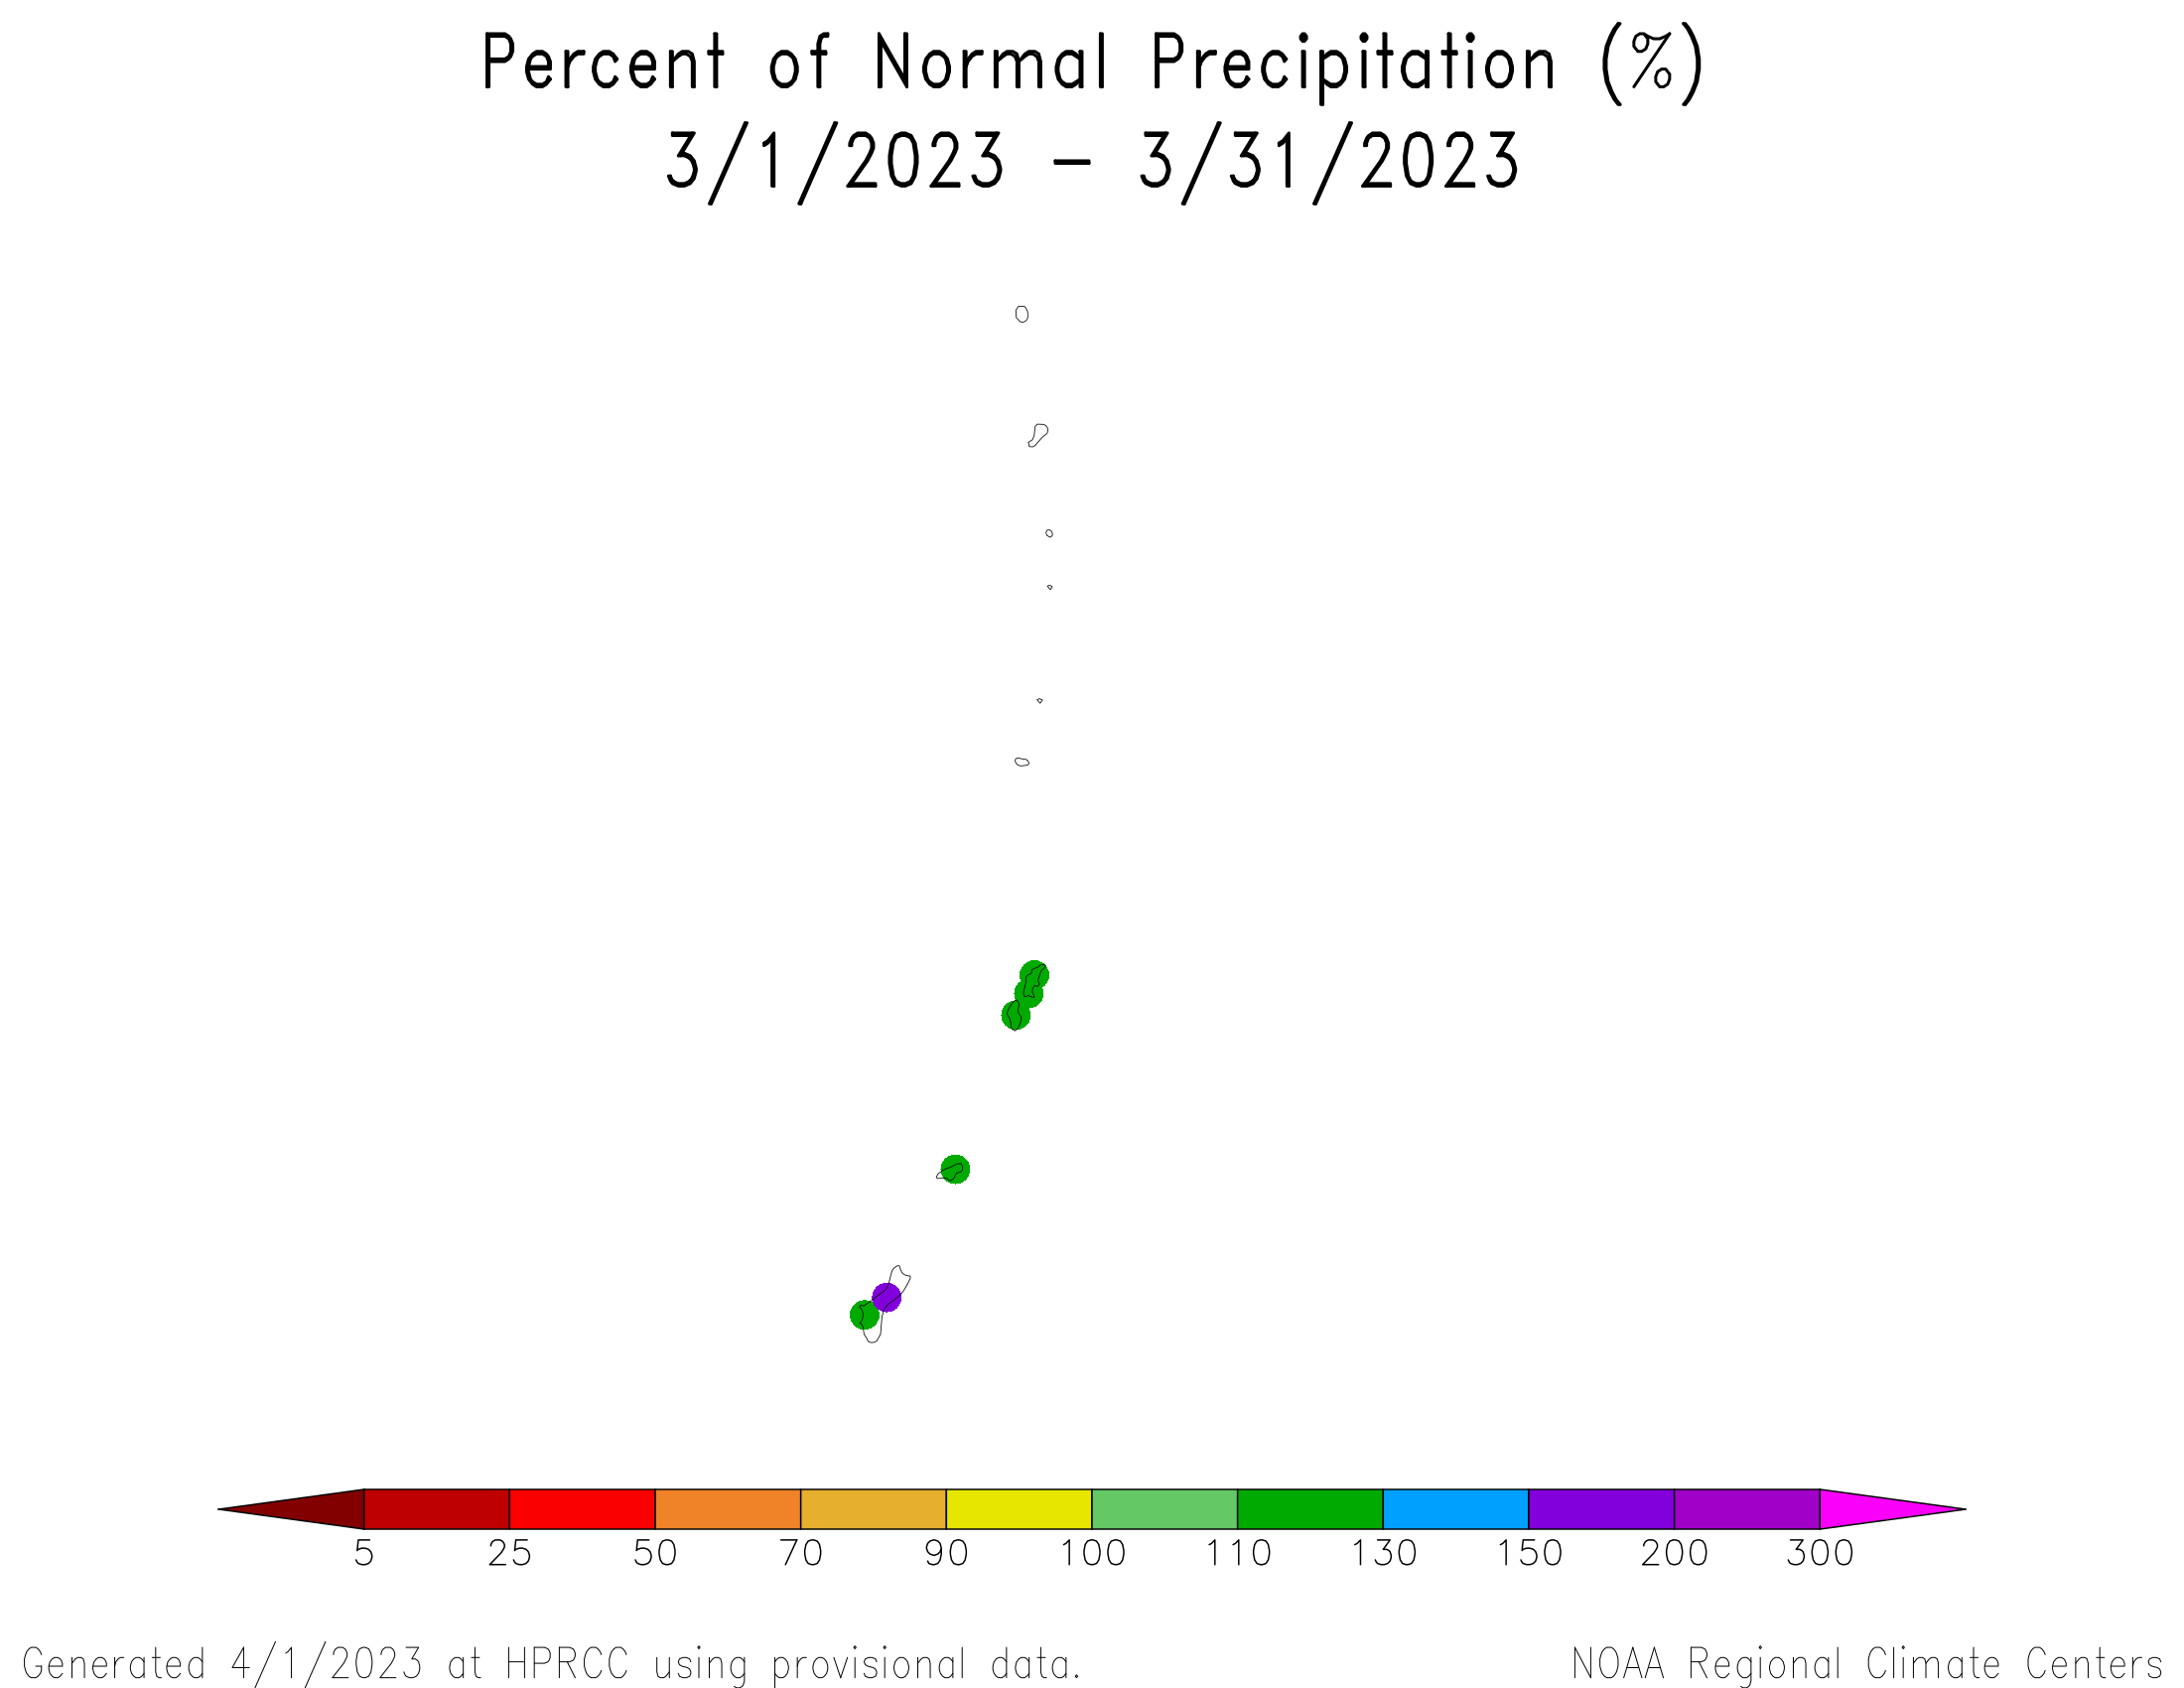 March 2023 Percent of Normal Precipitation for the Marianas